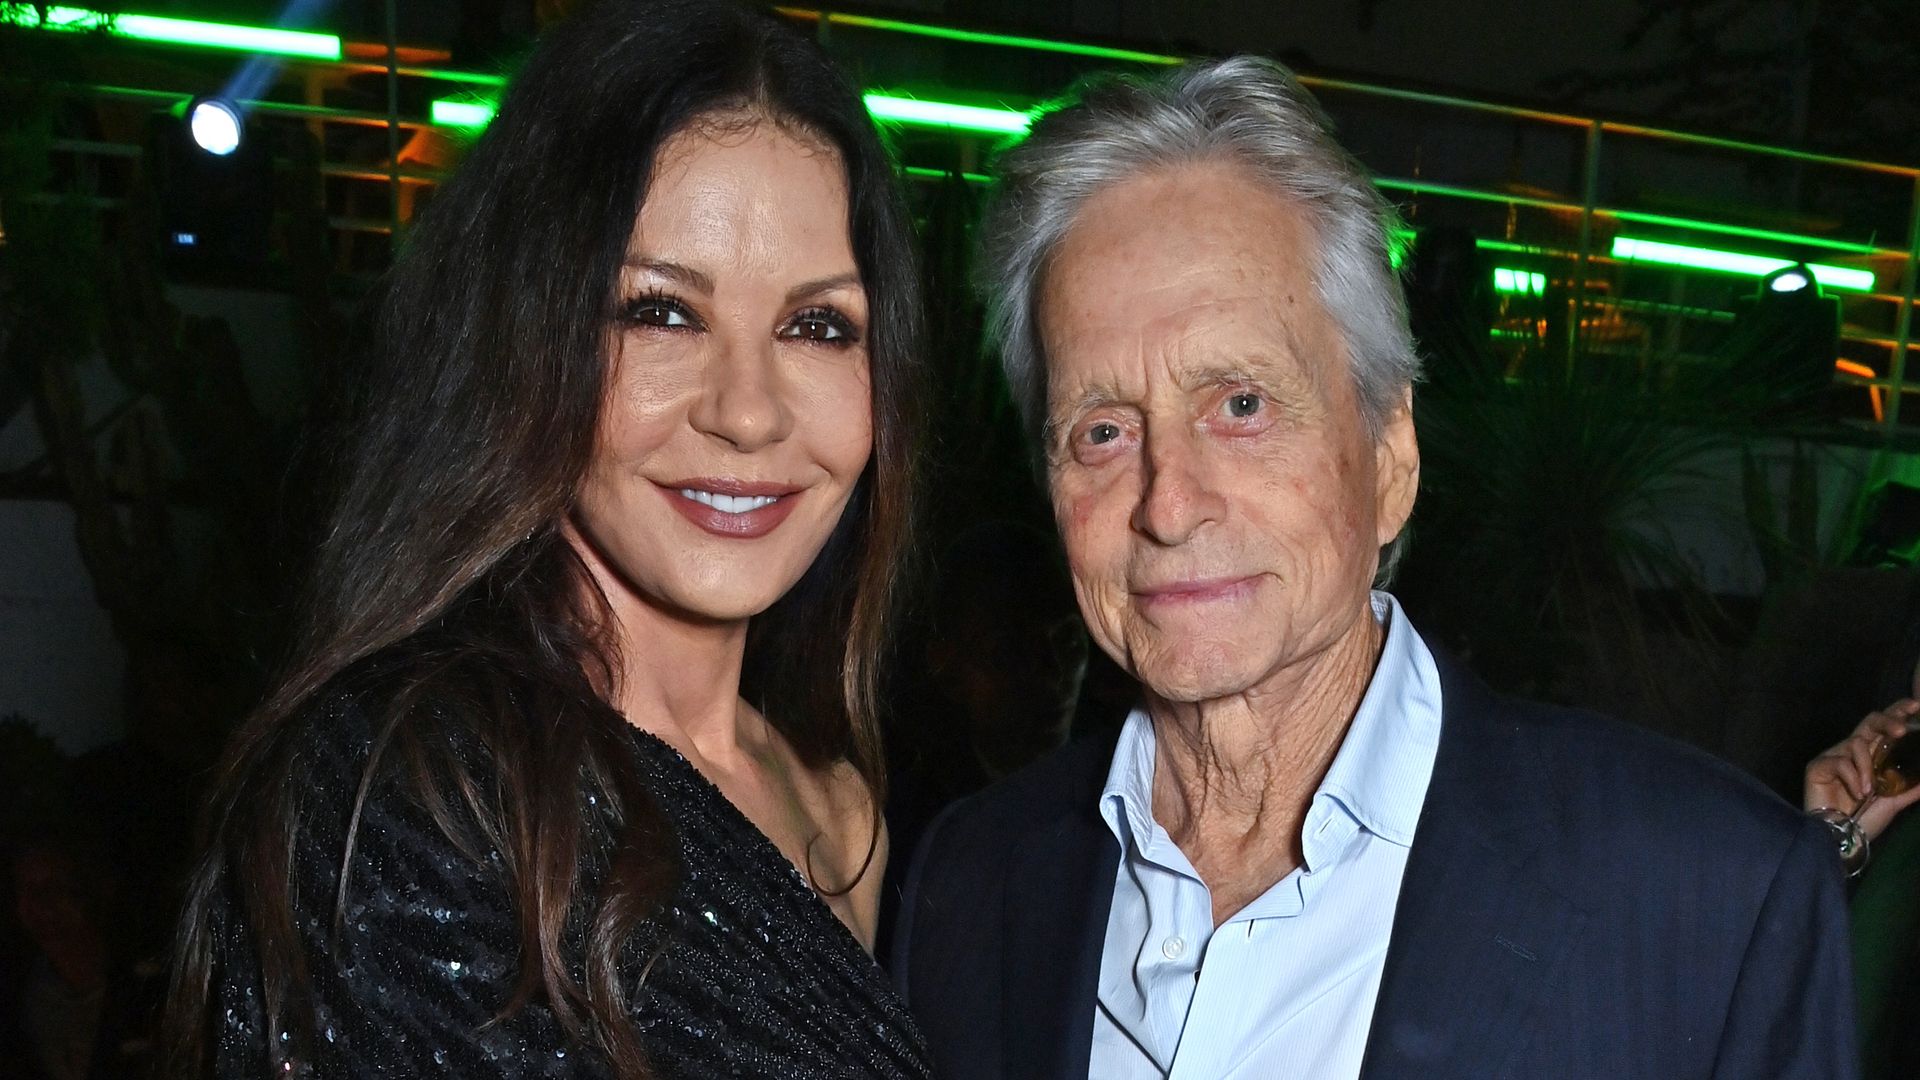 Catherine Zeta-Jones to spend time away from family home she shares with Michael Douglas - details